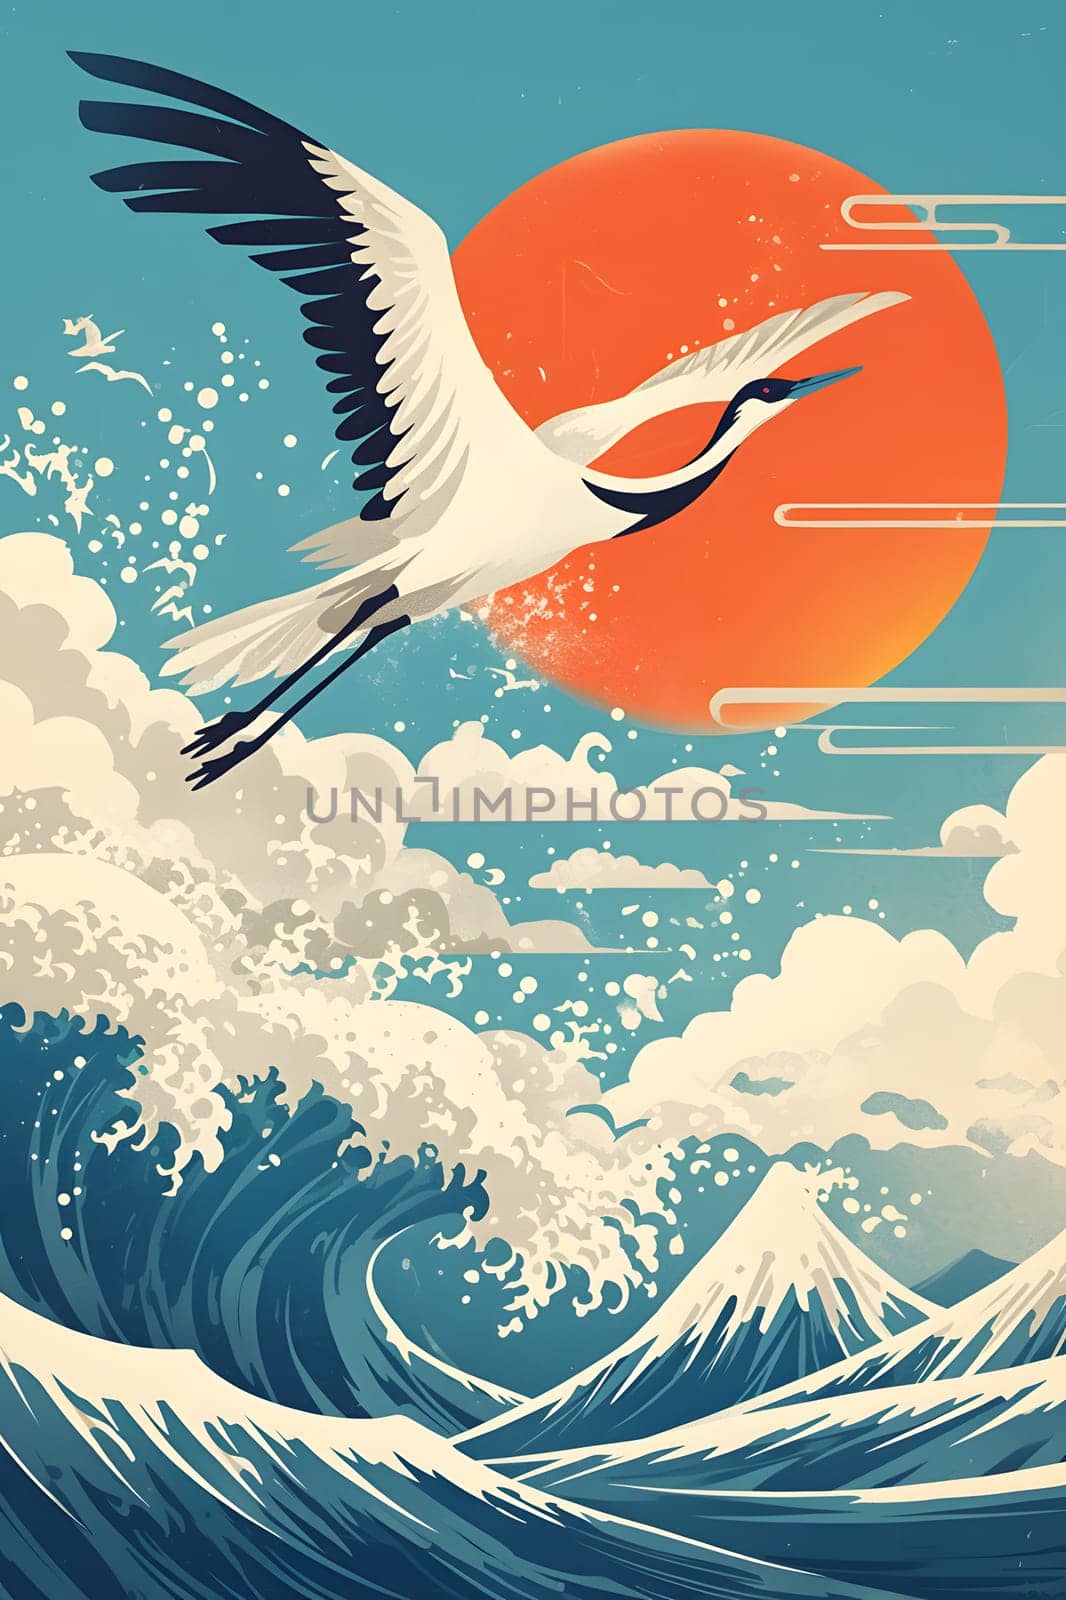 Seabird soaring above ocean wave with fish, wings spread by Nadtochiy